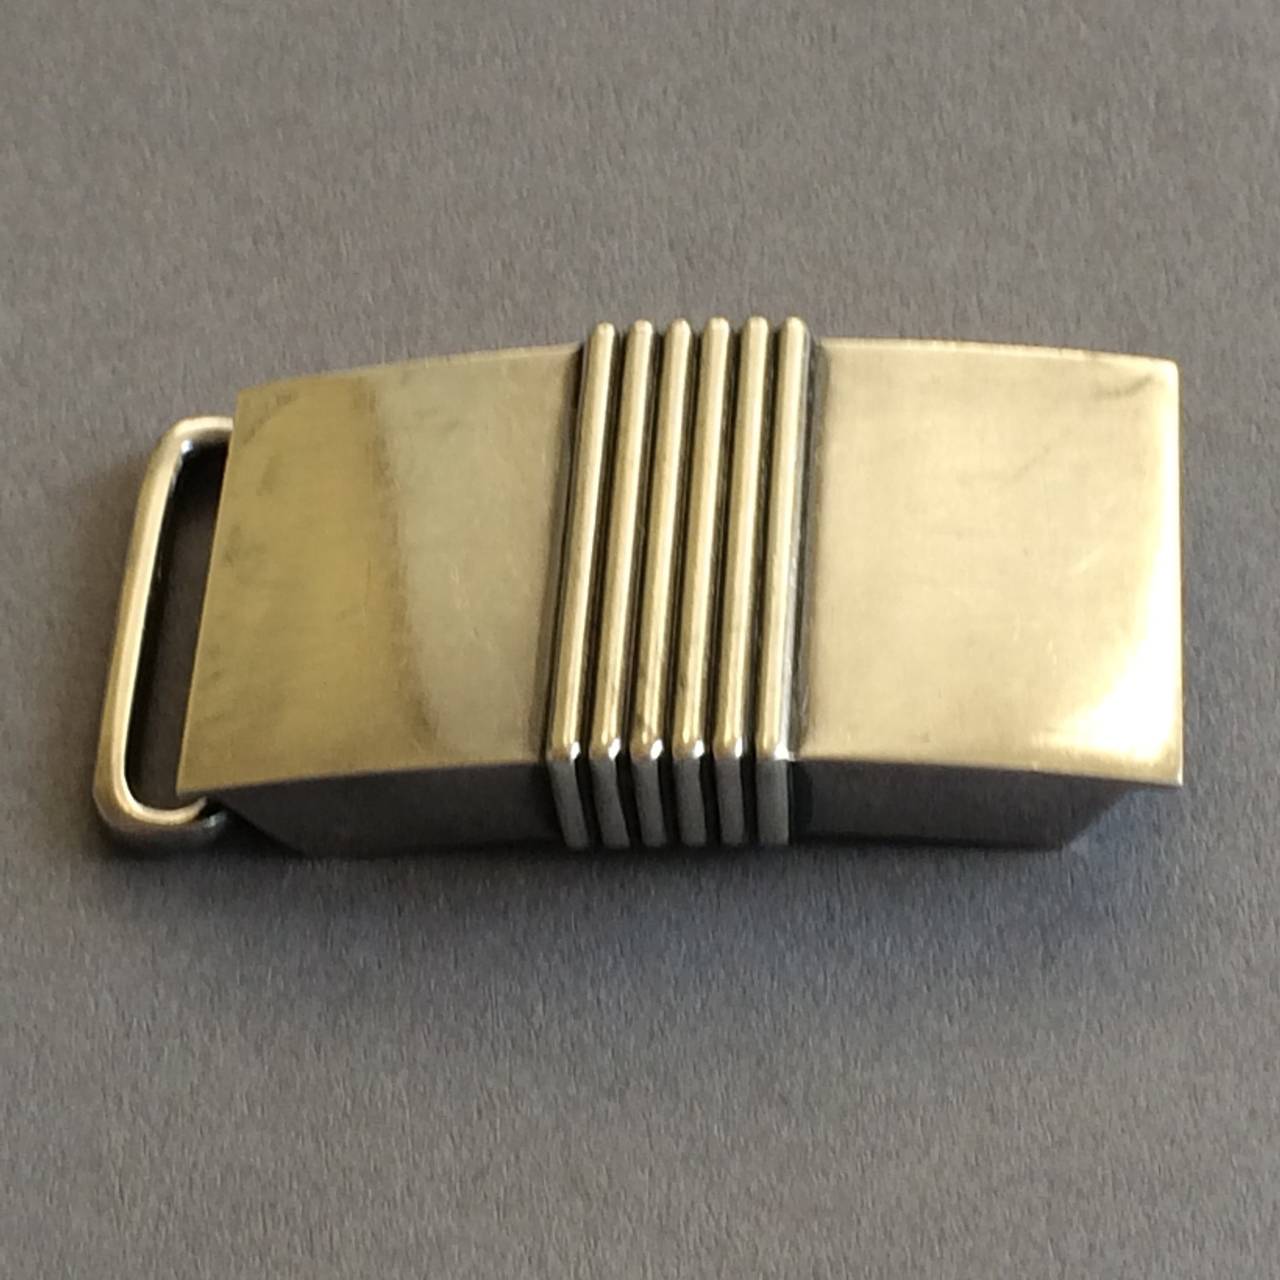 Georg Jensen Belt Buckle No. 76 by Harald Nielsen.

A rare find.  Heavy gauge sterling silver.  Ingenius hinged pressure closure.  Light surface scratchs.

Very good condition. Circa 1940's.

Matching tie bar and cufflinks available.